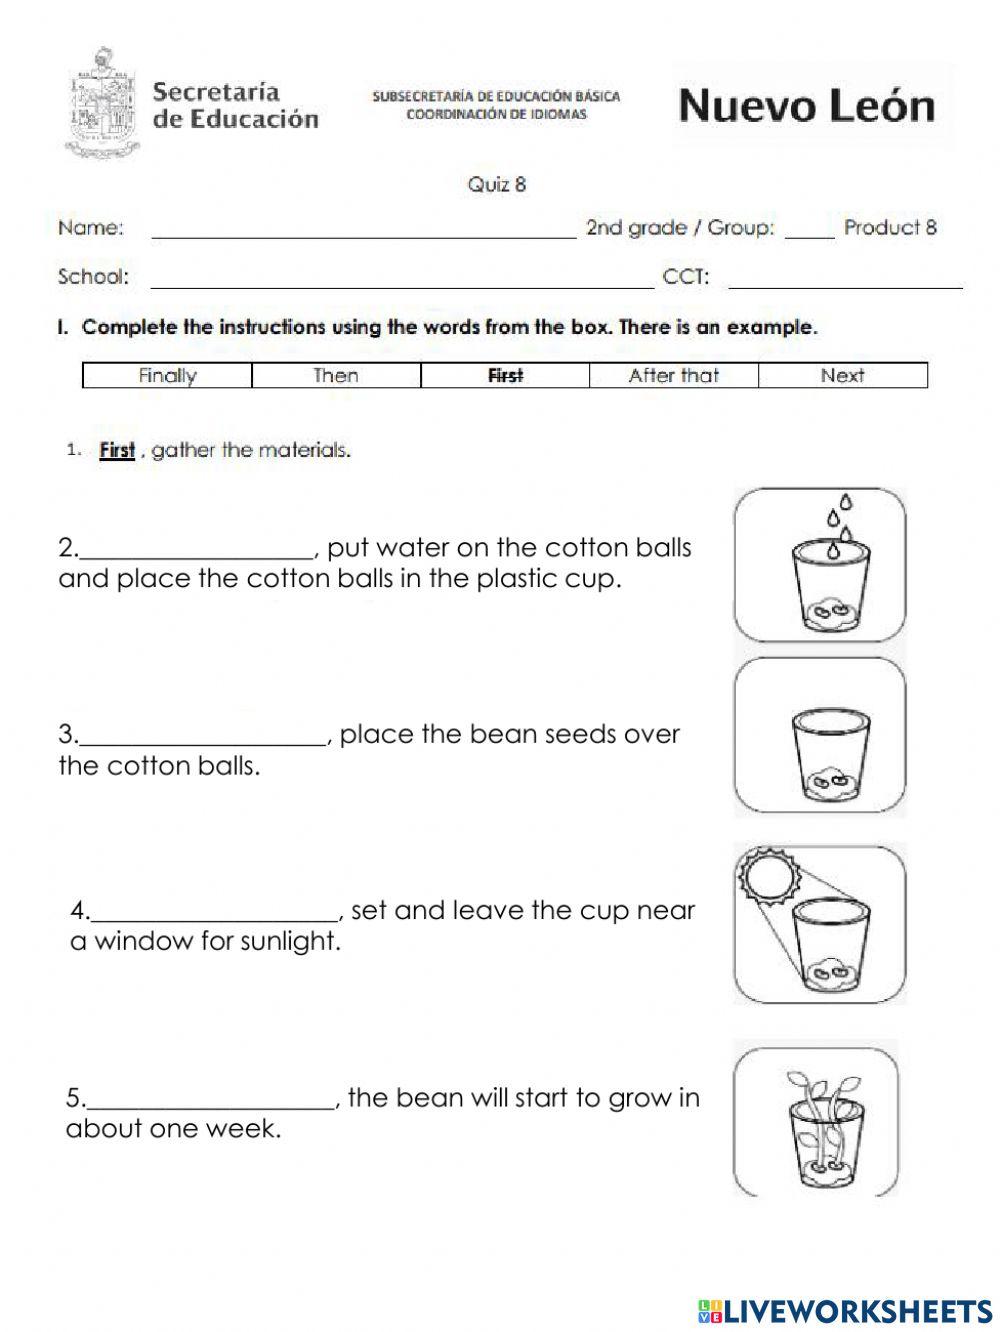 2nd grade quiz product 8